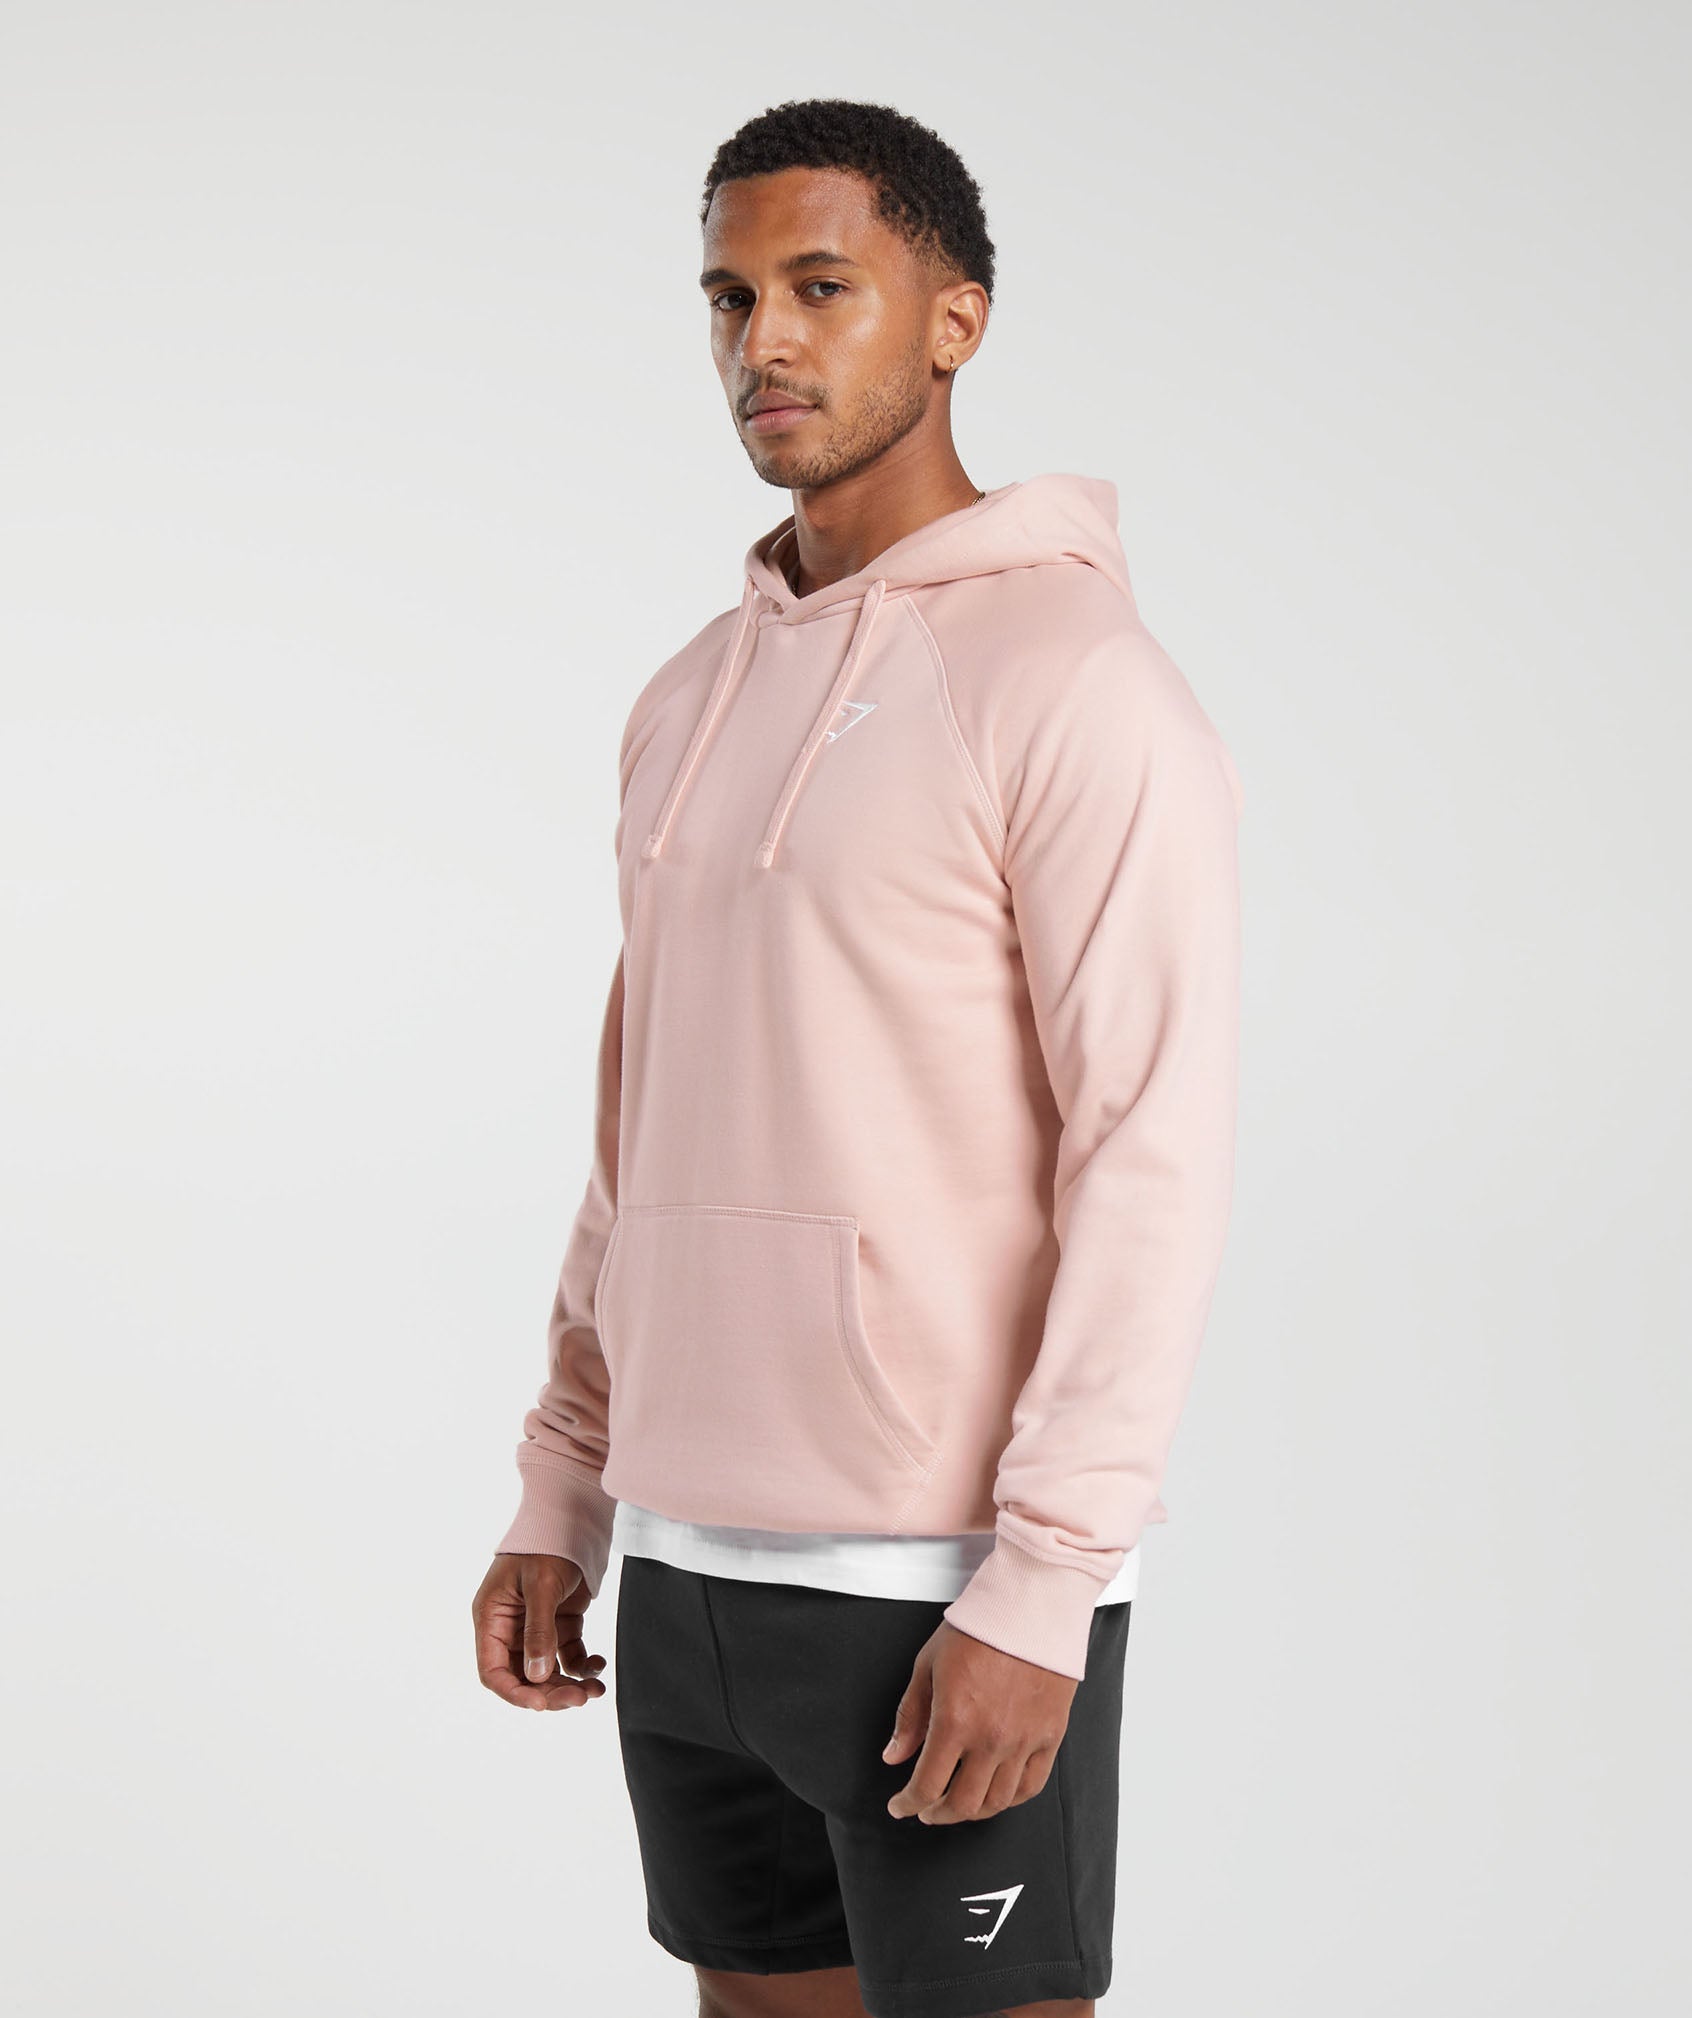 Crest Hoodie in Misty Pink - view 3